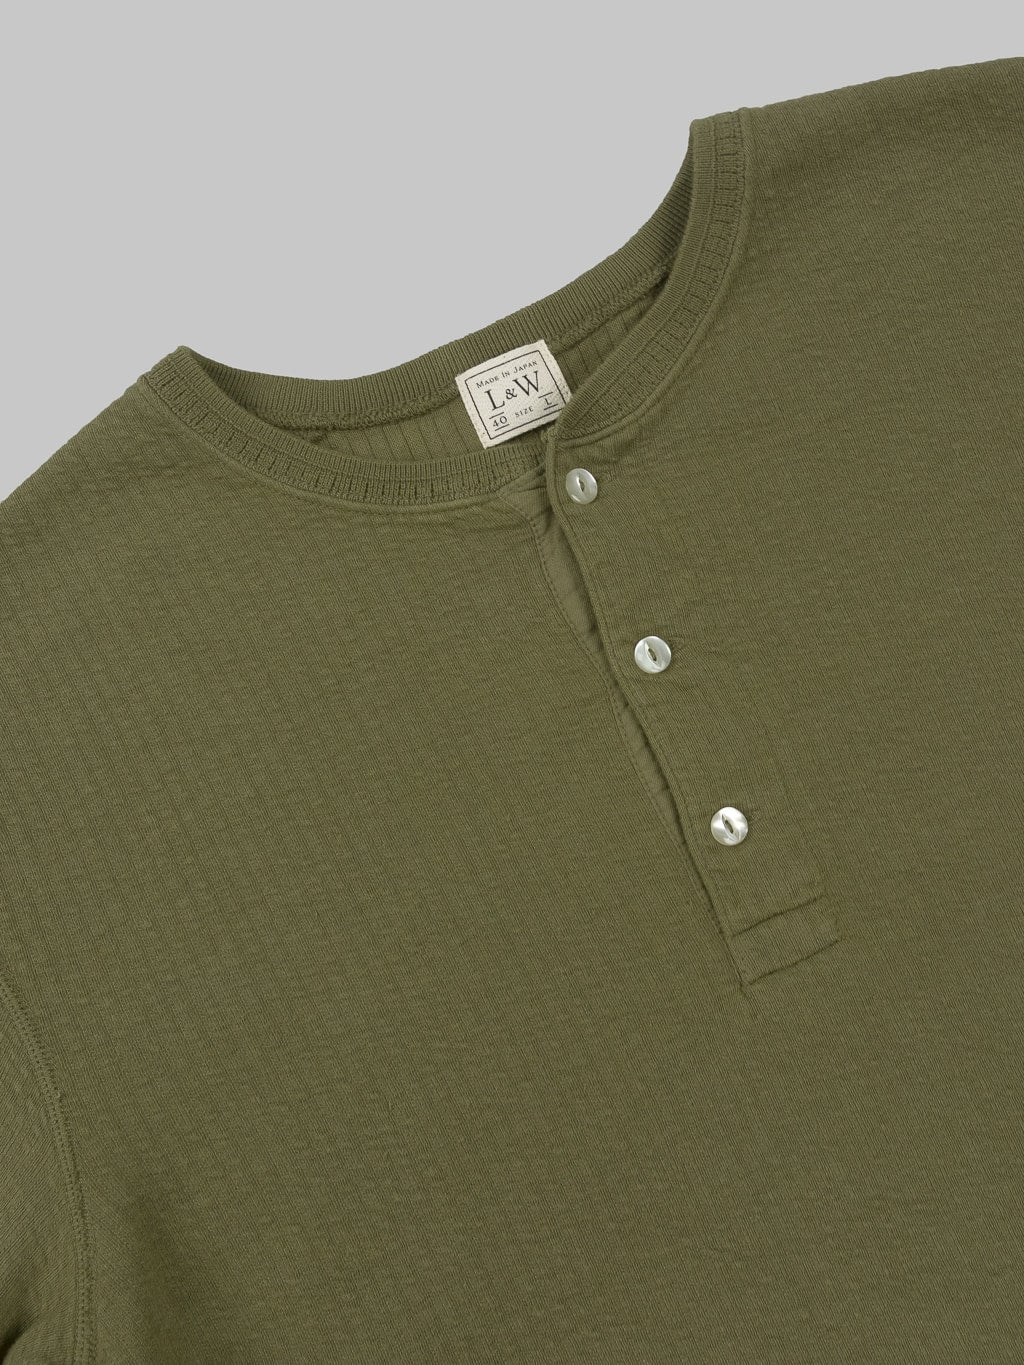 Loop Weft Double Face Jacquard henley Thermal army olive ribbed collar